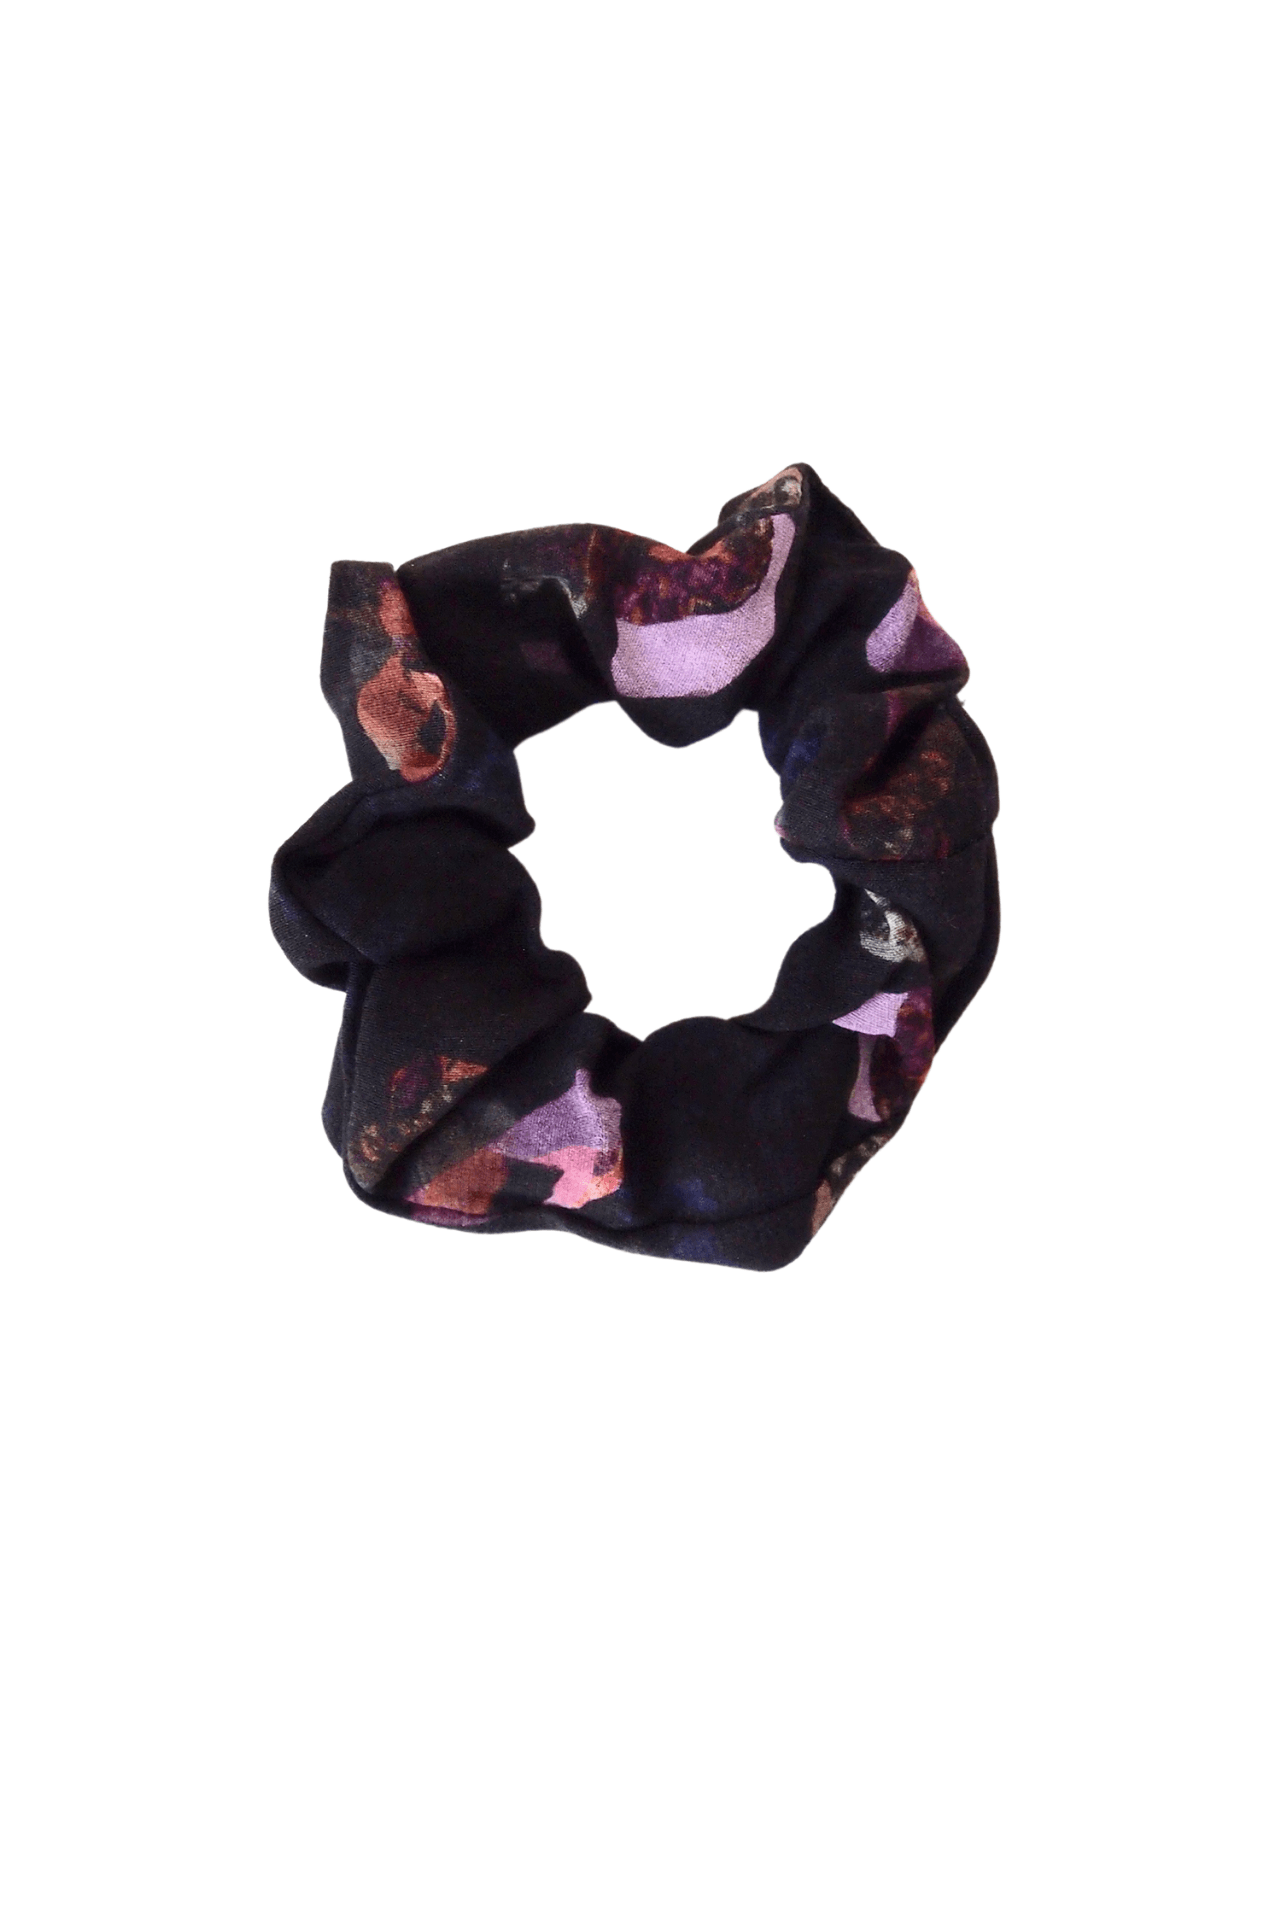 Buy online our sustainable clothing Accessories Scrunchie - Dark Matter Ecovero - MORICO